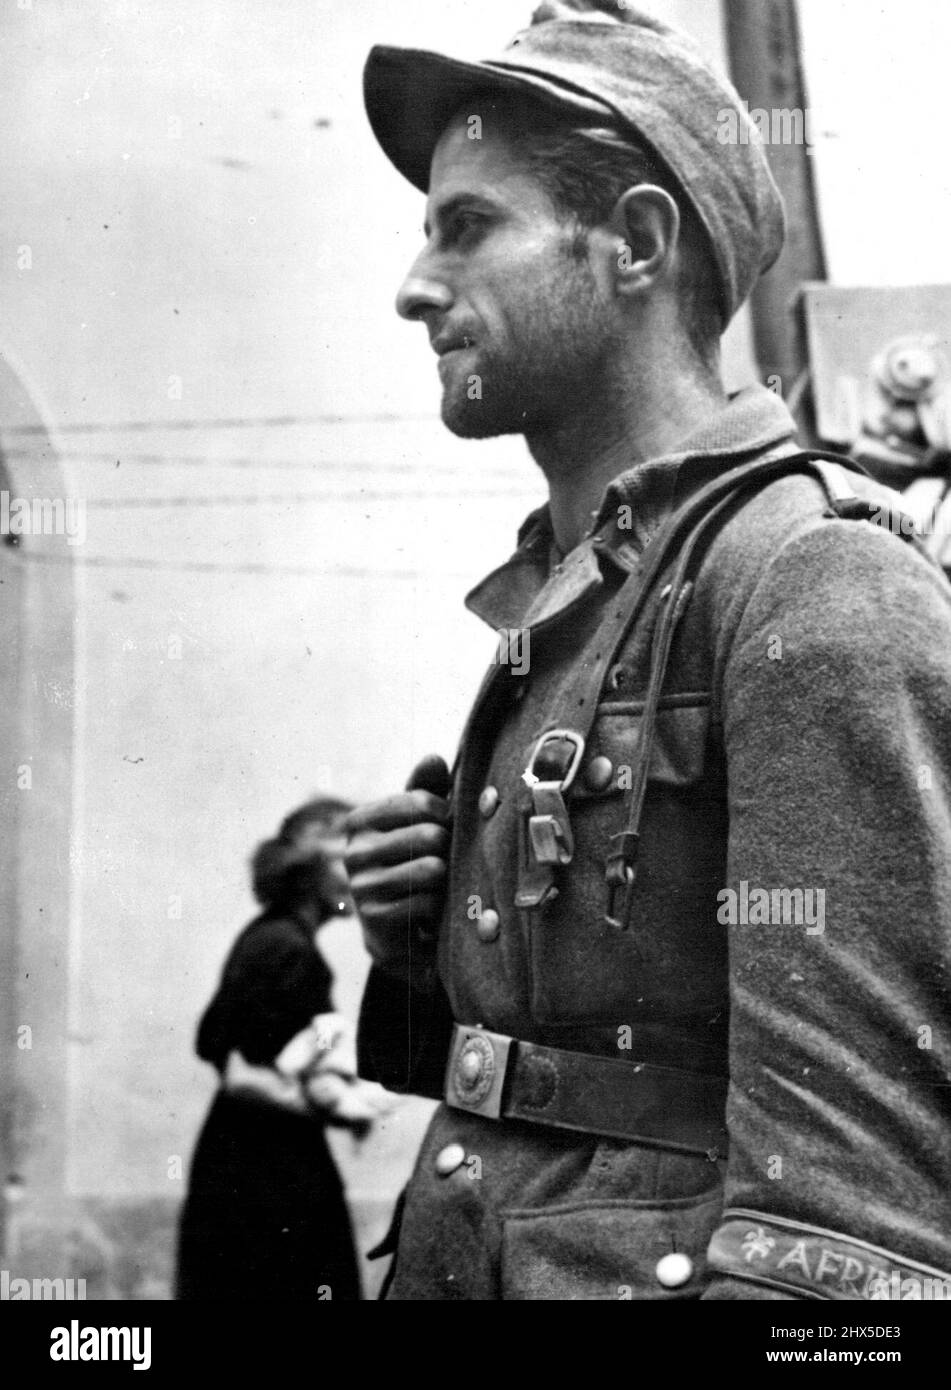 Seasoned German Veteran Gives Up A German veteran of the retreats in North Africa and Sicily, found the going too touch in Italy. Wounded at Cassino, he was put into action again after a brief convalescence but decided to surrender. He is shown in a prisoner-of-war camp at Palaia, Italy. The Allied Fifth Army had taken 40,000 prisoners by Aug. 8, 1944 in its advance northward in Italy toward the enemy's Goth Line. September 13, 1944. (Photo by U.S. Office of War Information Picture). Stock Photo